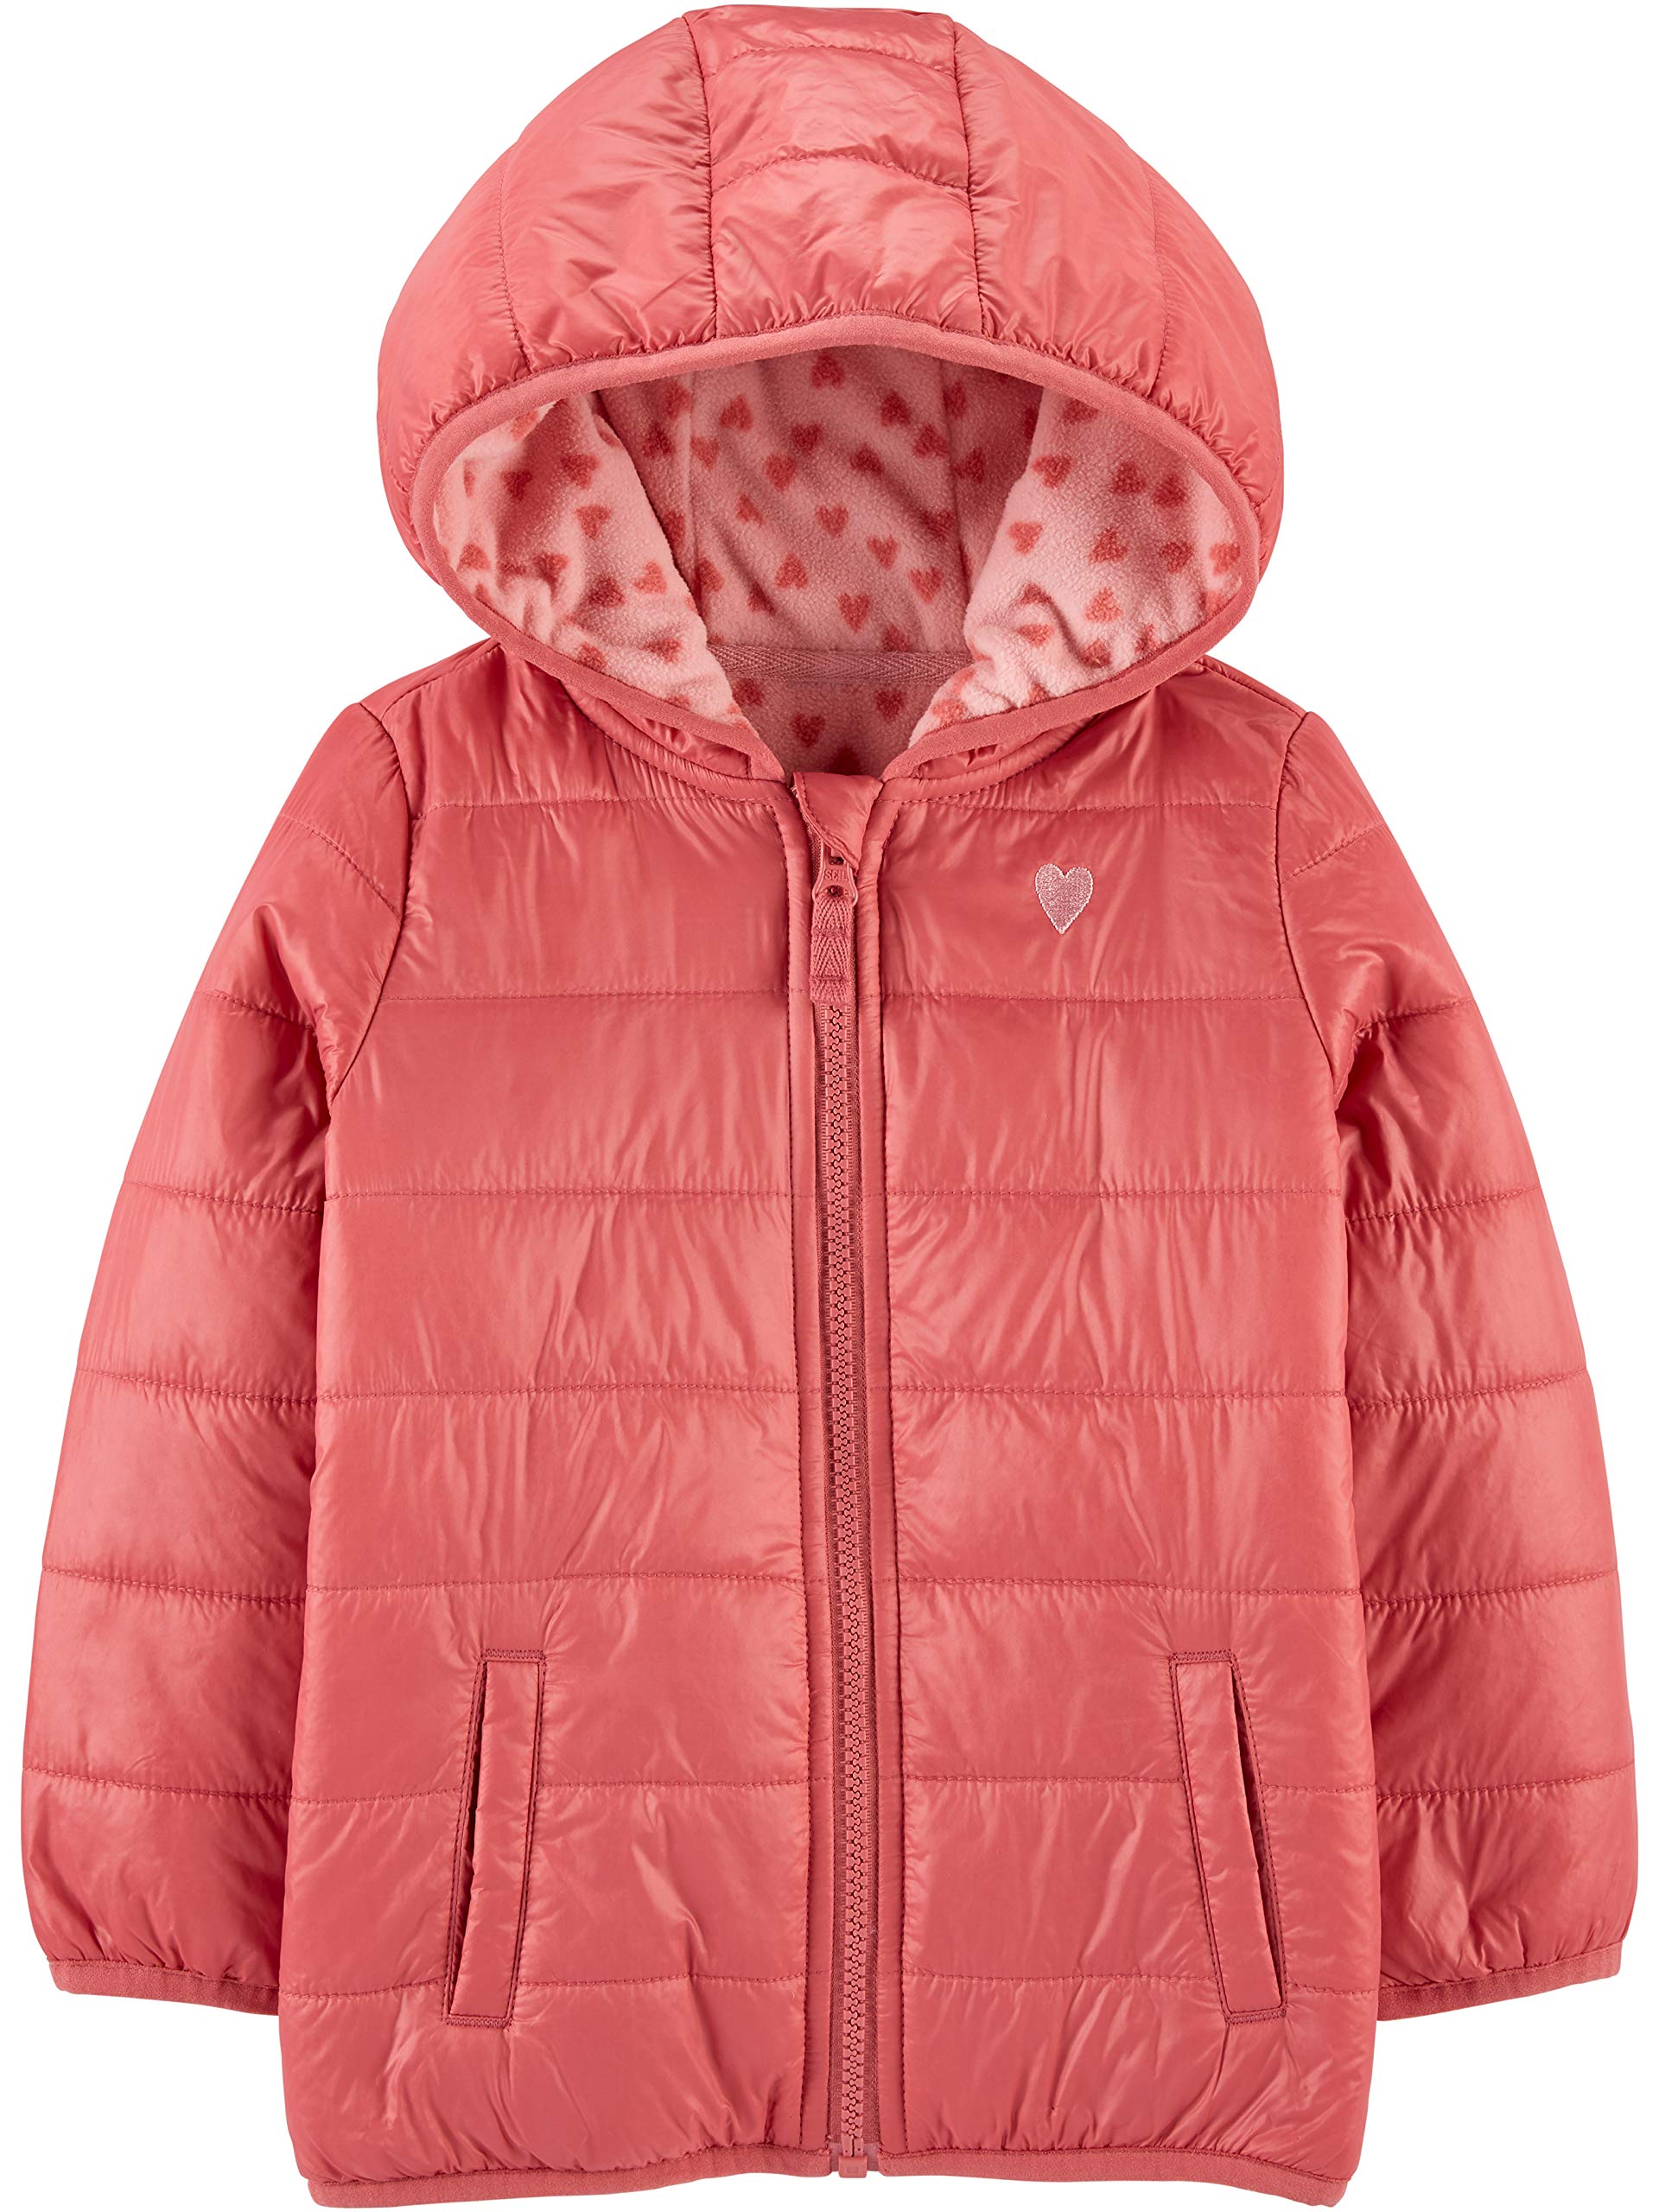 Simple Joys by Carter's Toddlers and Baby Girls' Puffer Jacket